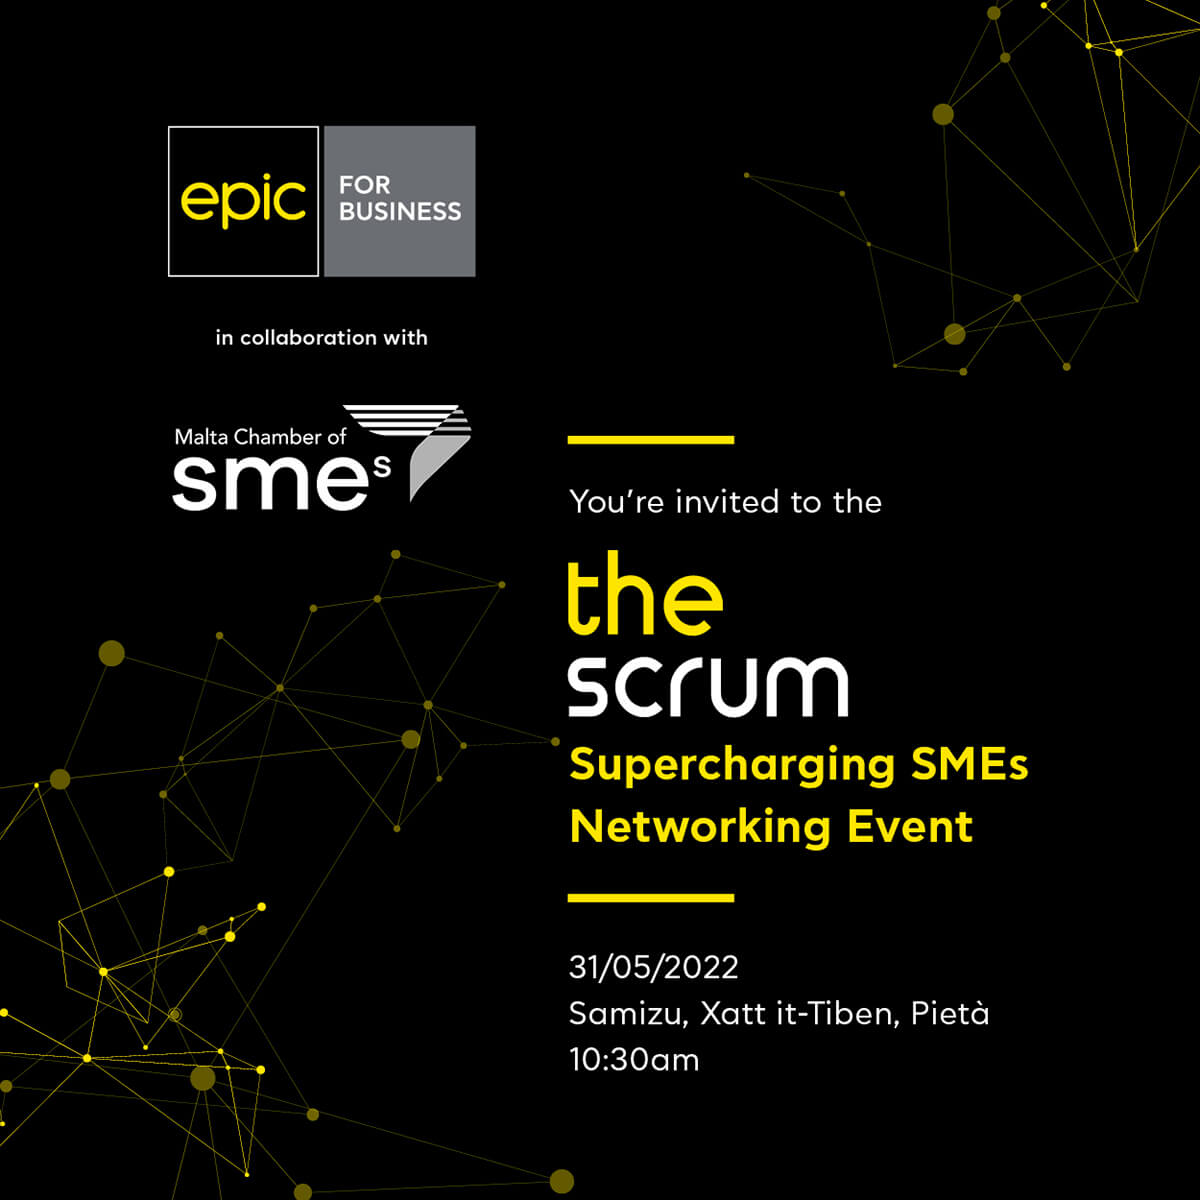 Epic for Business and Malta Chamber of SMEs partner up to help SMEs get future ready